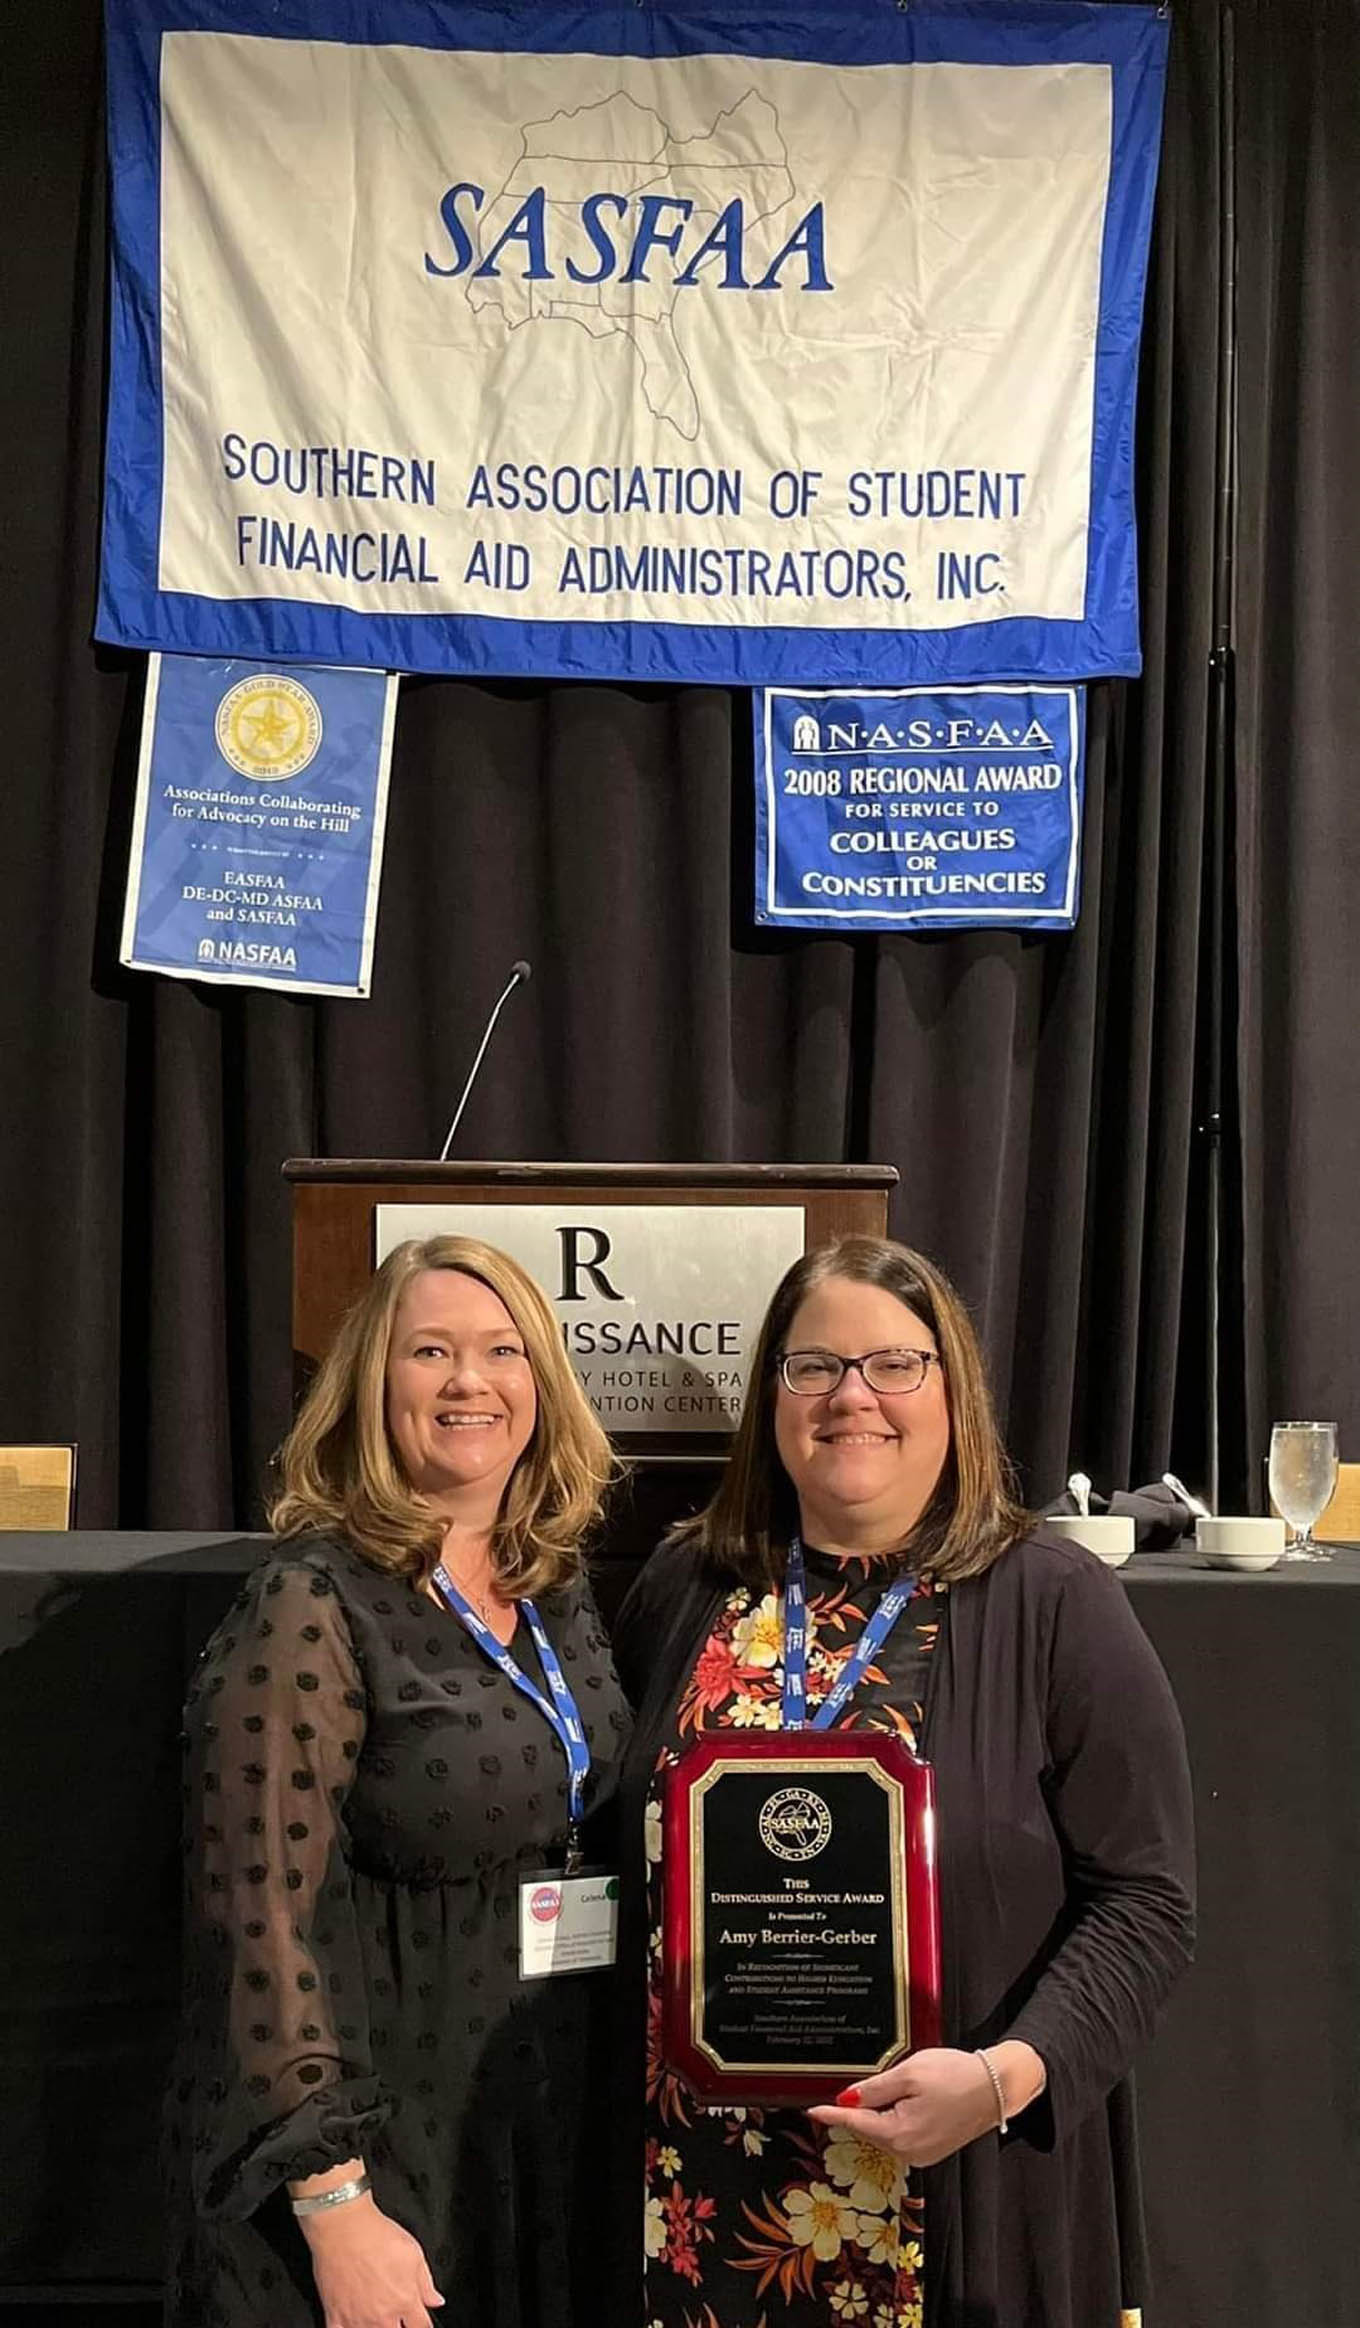 CCCC's Amy Berrier-Gerber receives SASFAA Distinguished Service Award